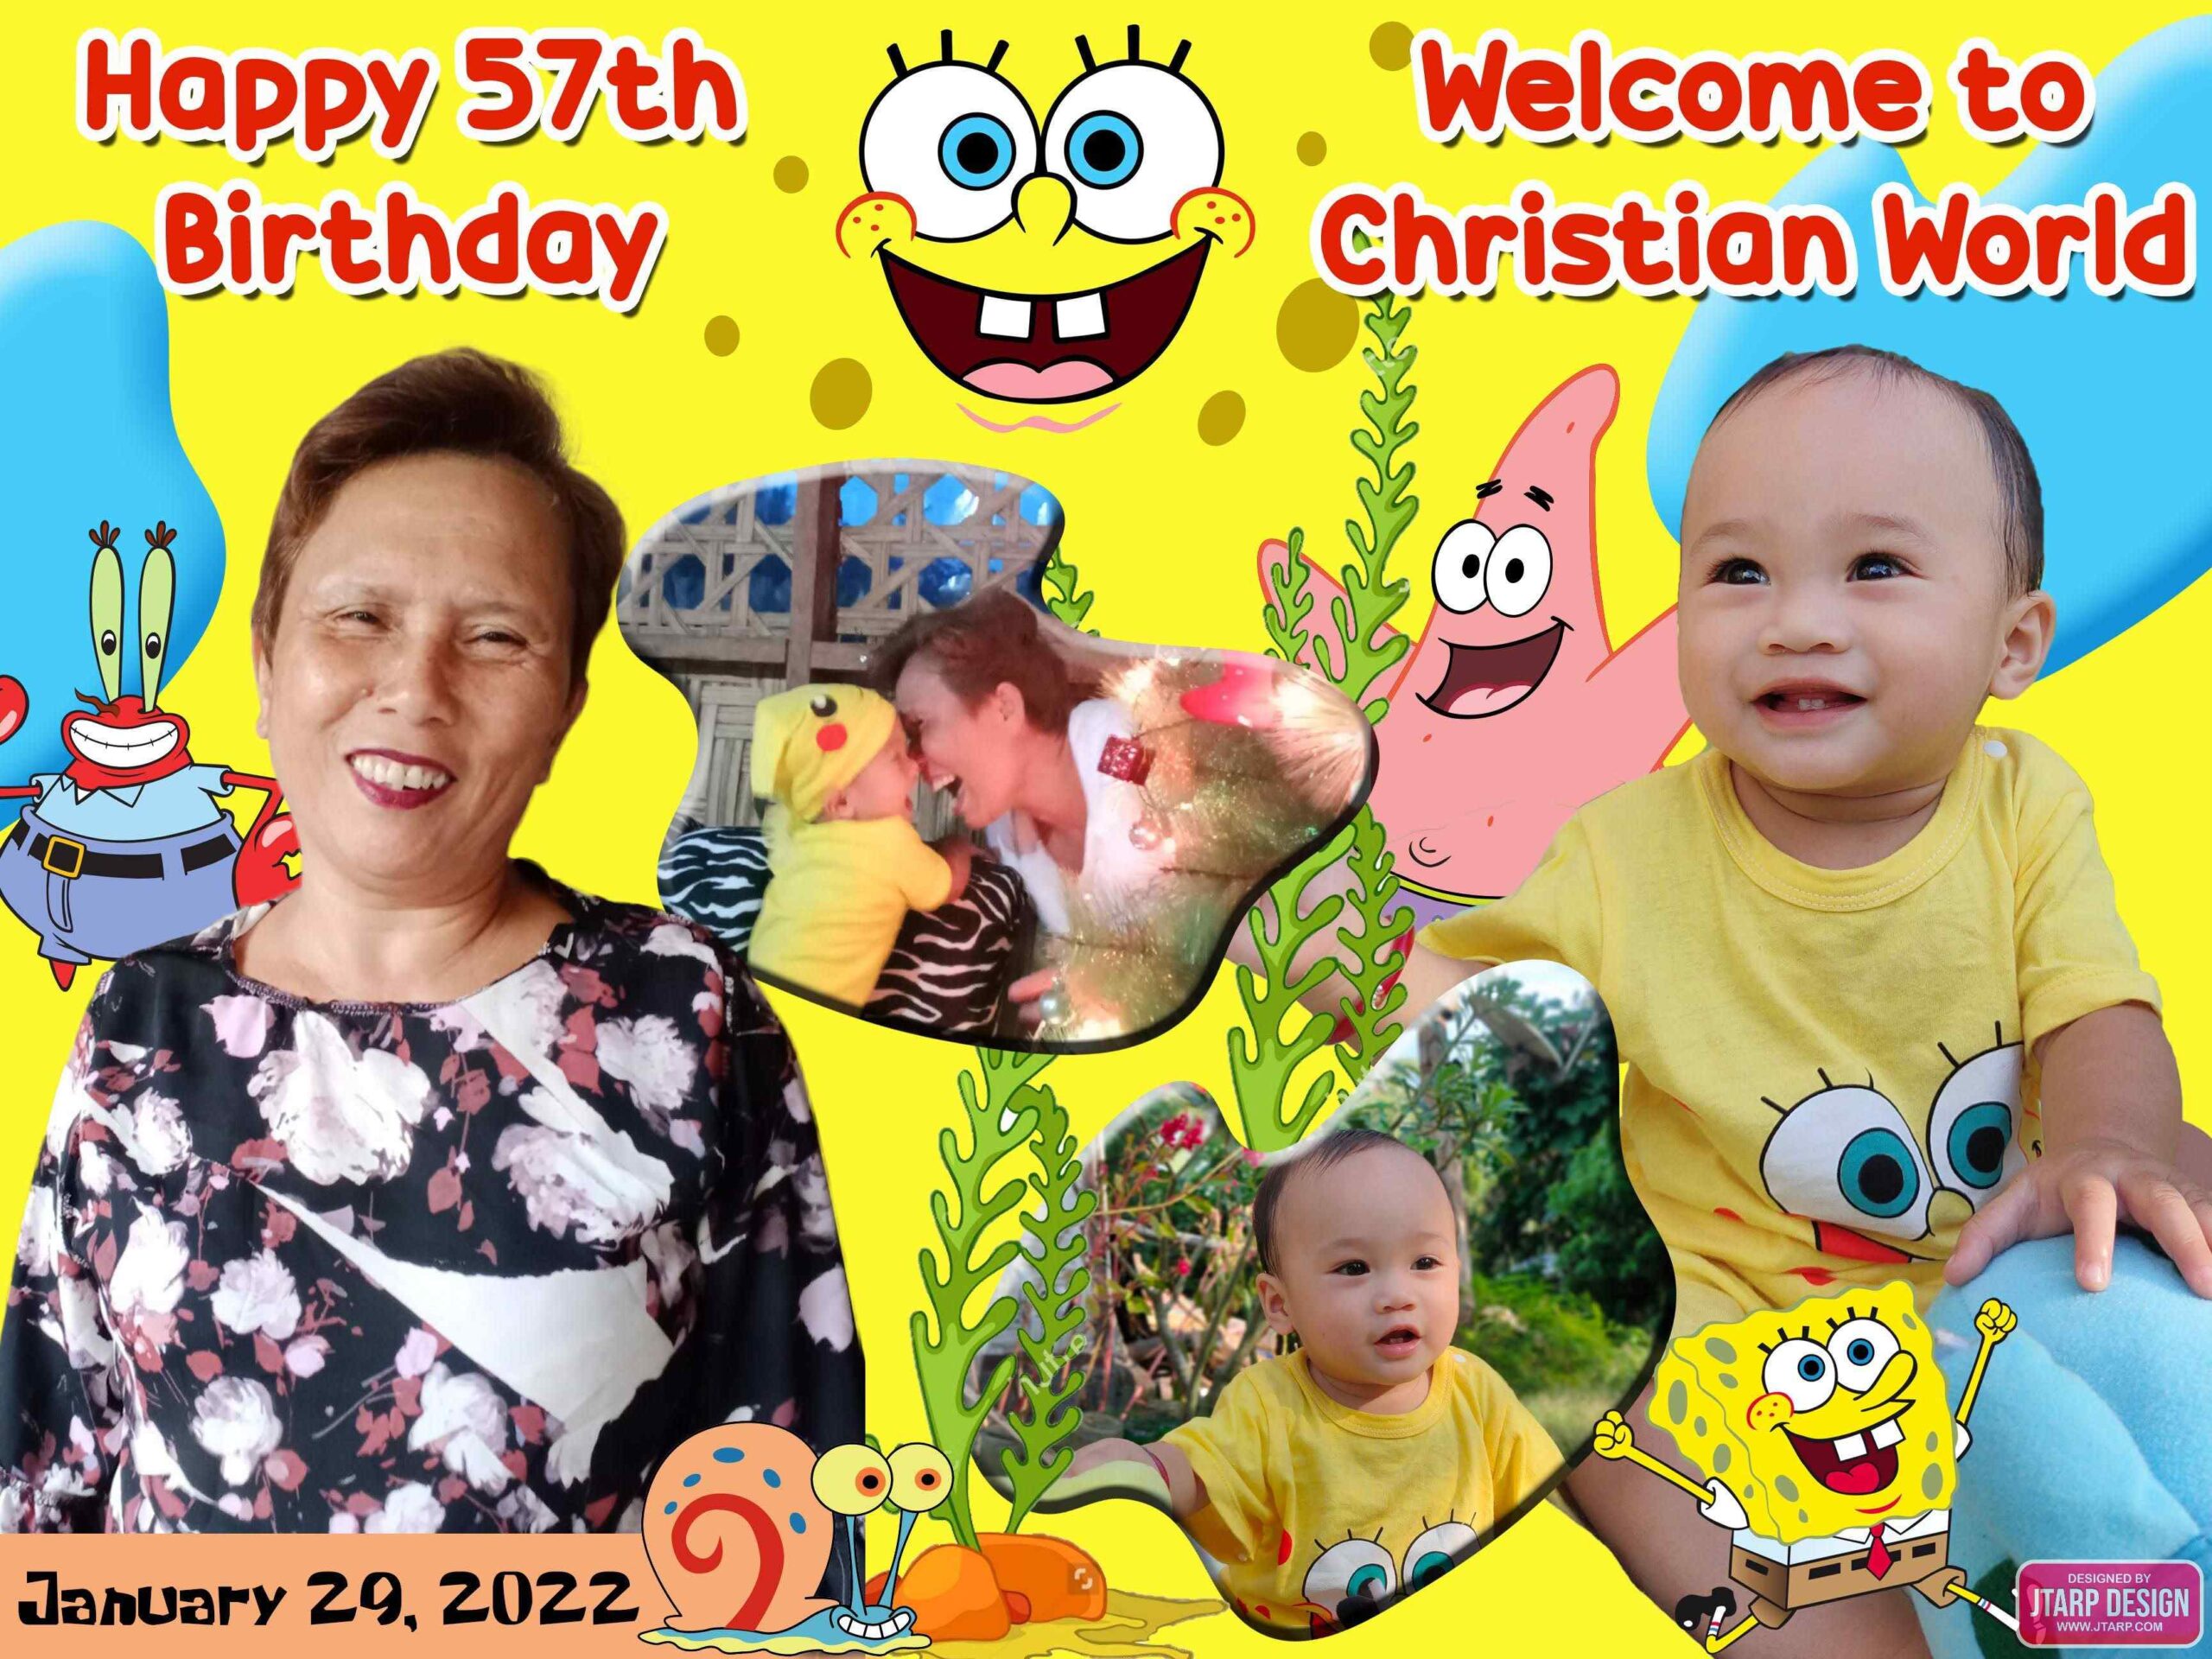 3x4 Welcome to Christian Word and Happy 57th Birthday Tarpaulin Design